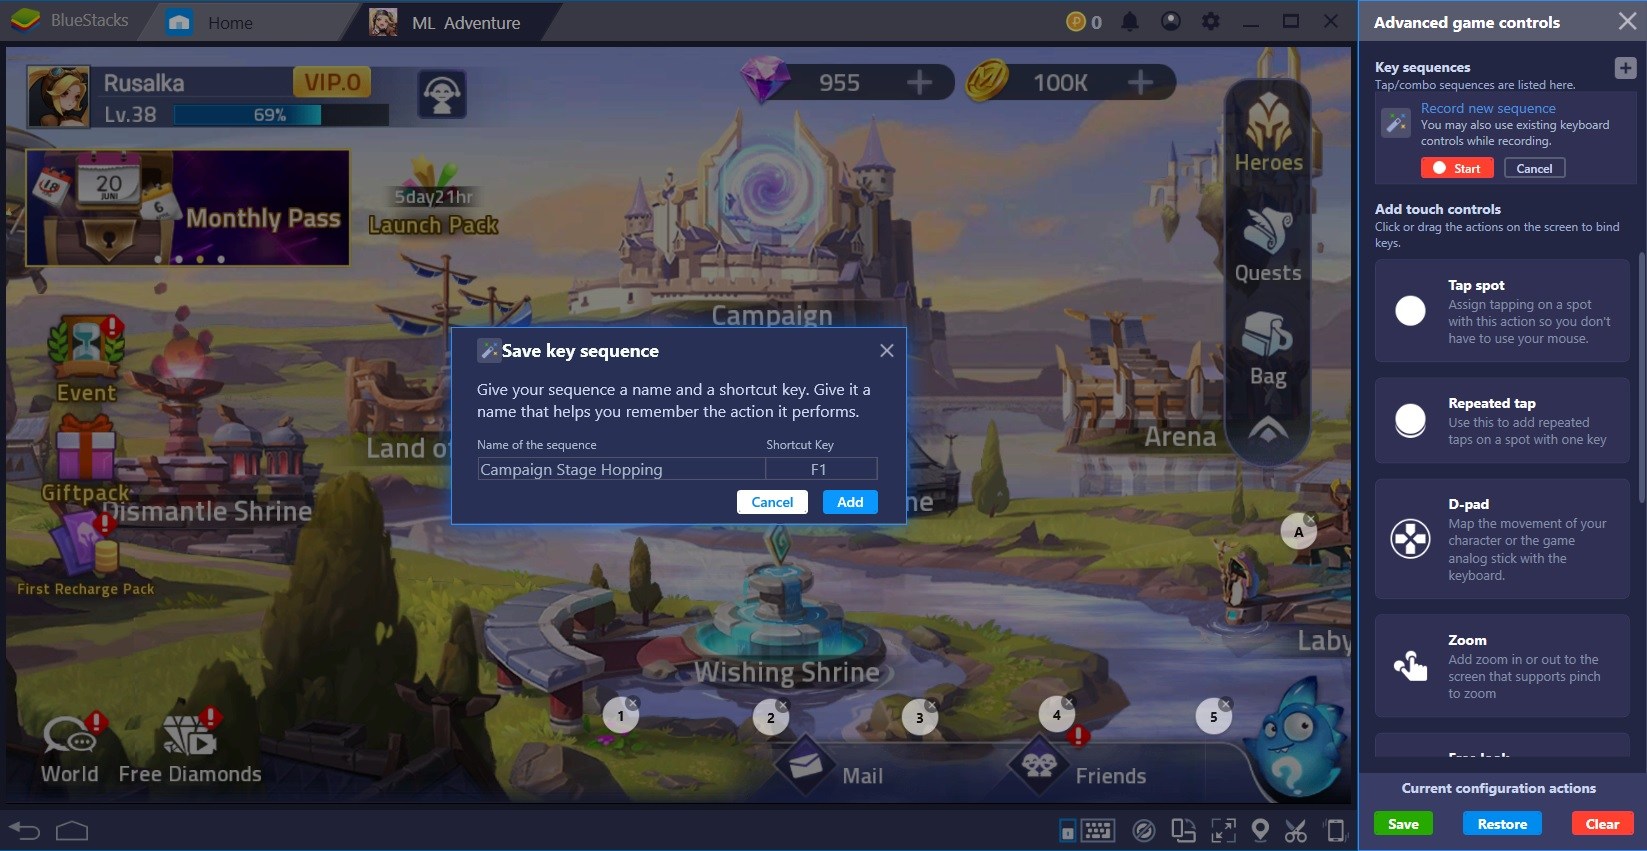 Play Mobile Legends: Adventure on PC with BlueStacks